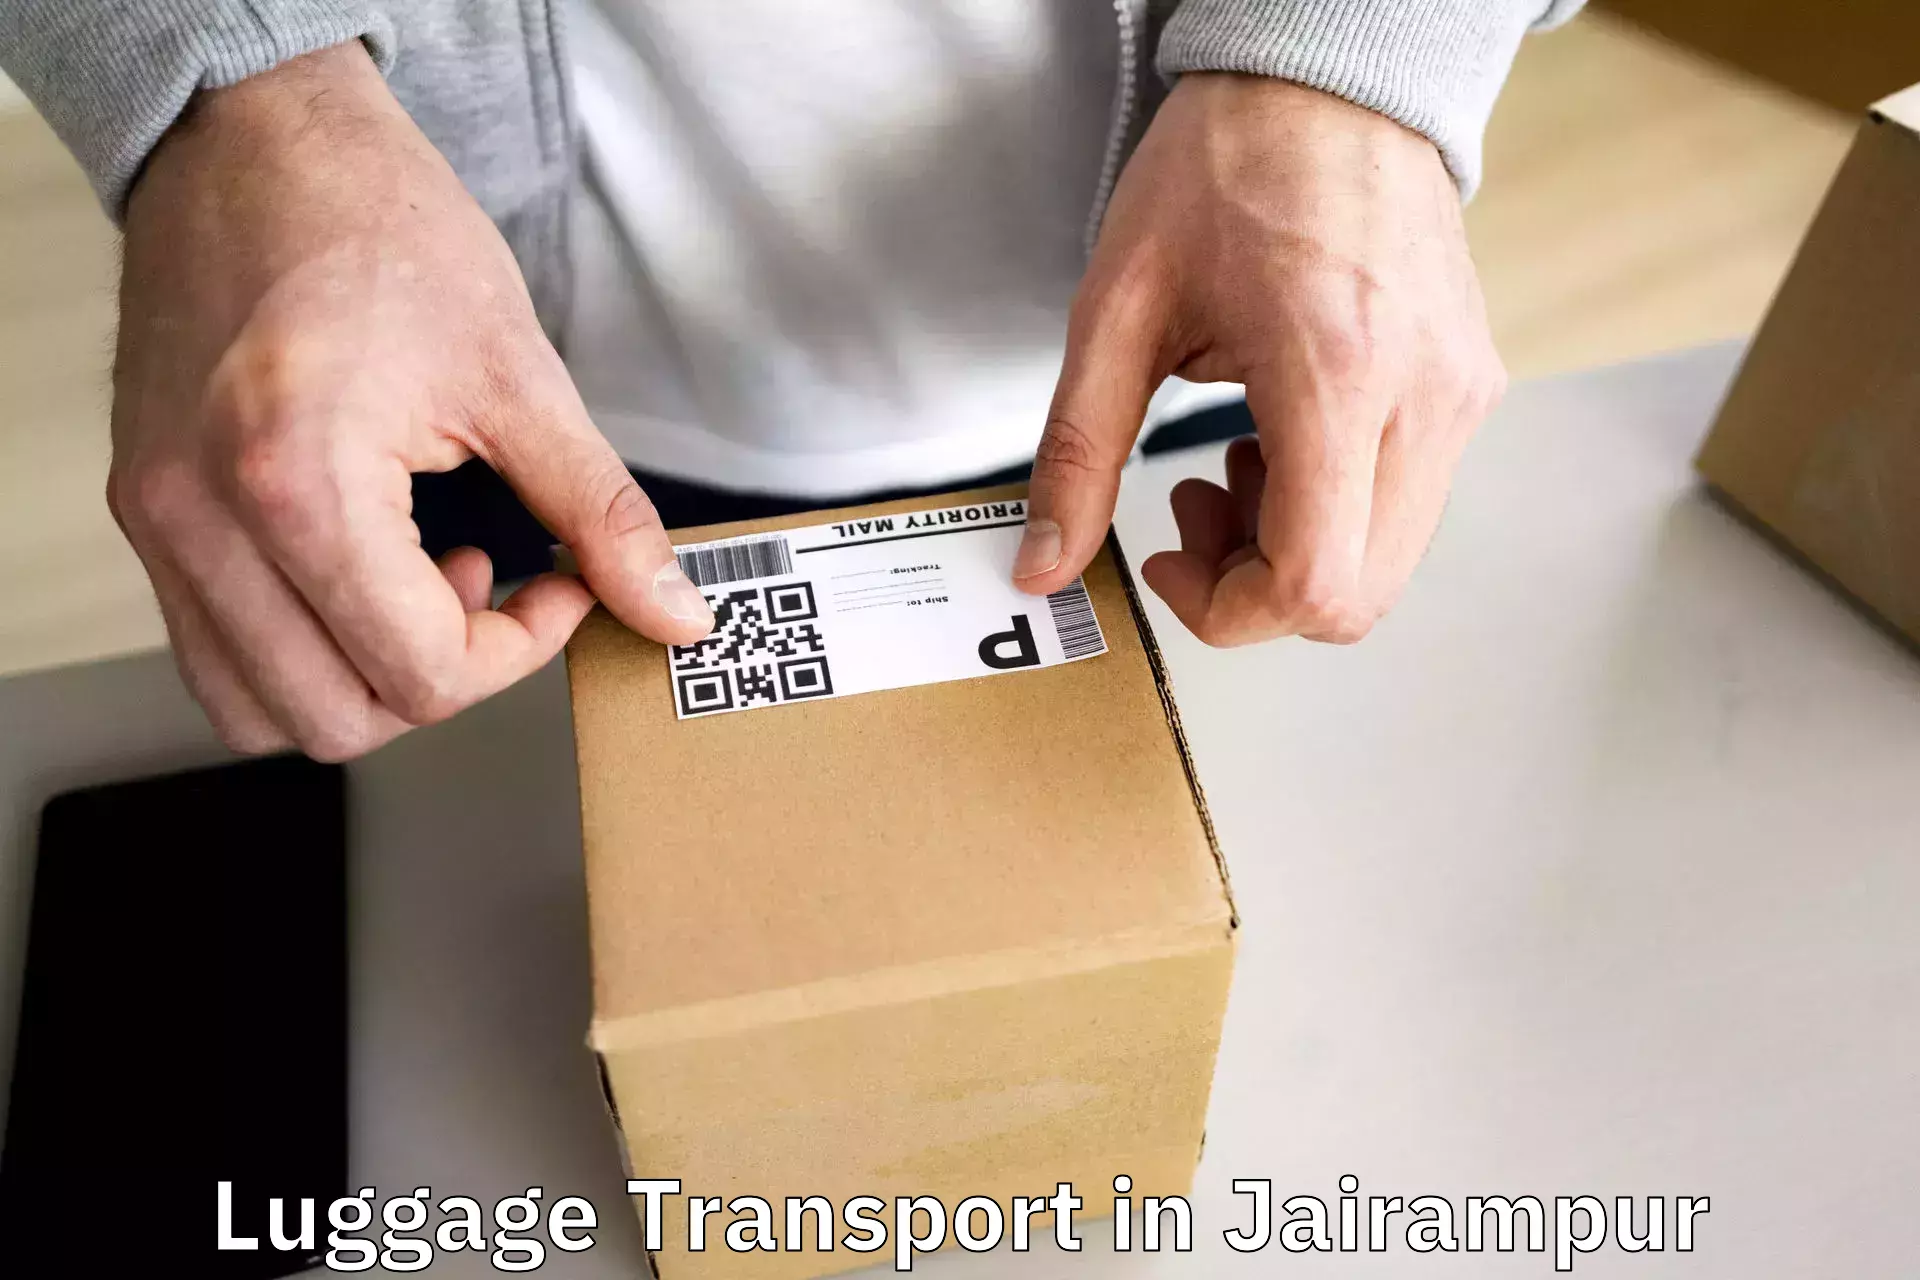 Baggage delivery scheduling in Jairampur